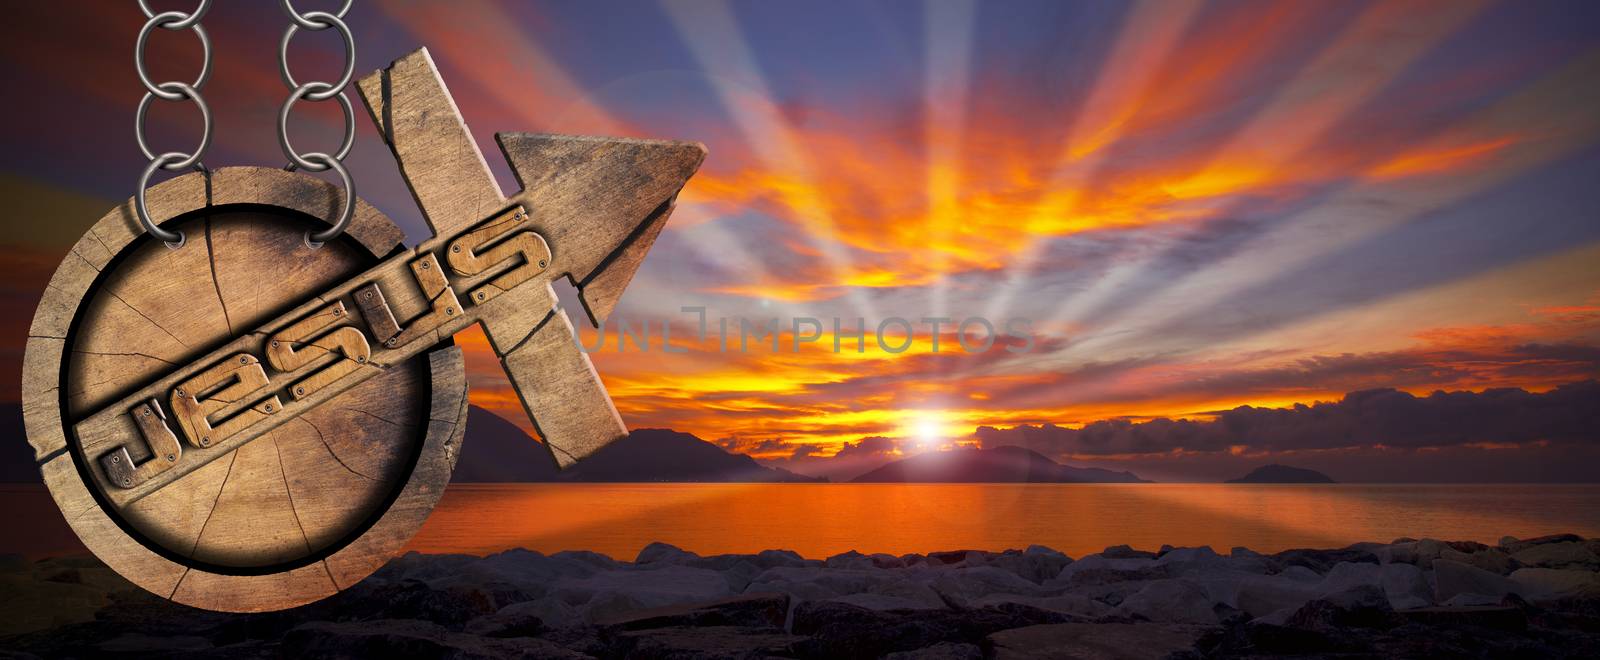 Wooden symbol with cross and arrow upward and text Jesus. Hanging from a chain at a beautiful sunset over the sea with cloudy sky